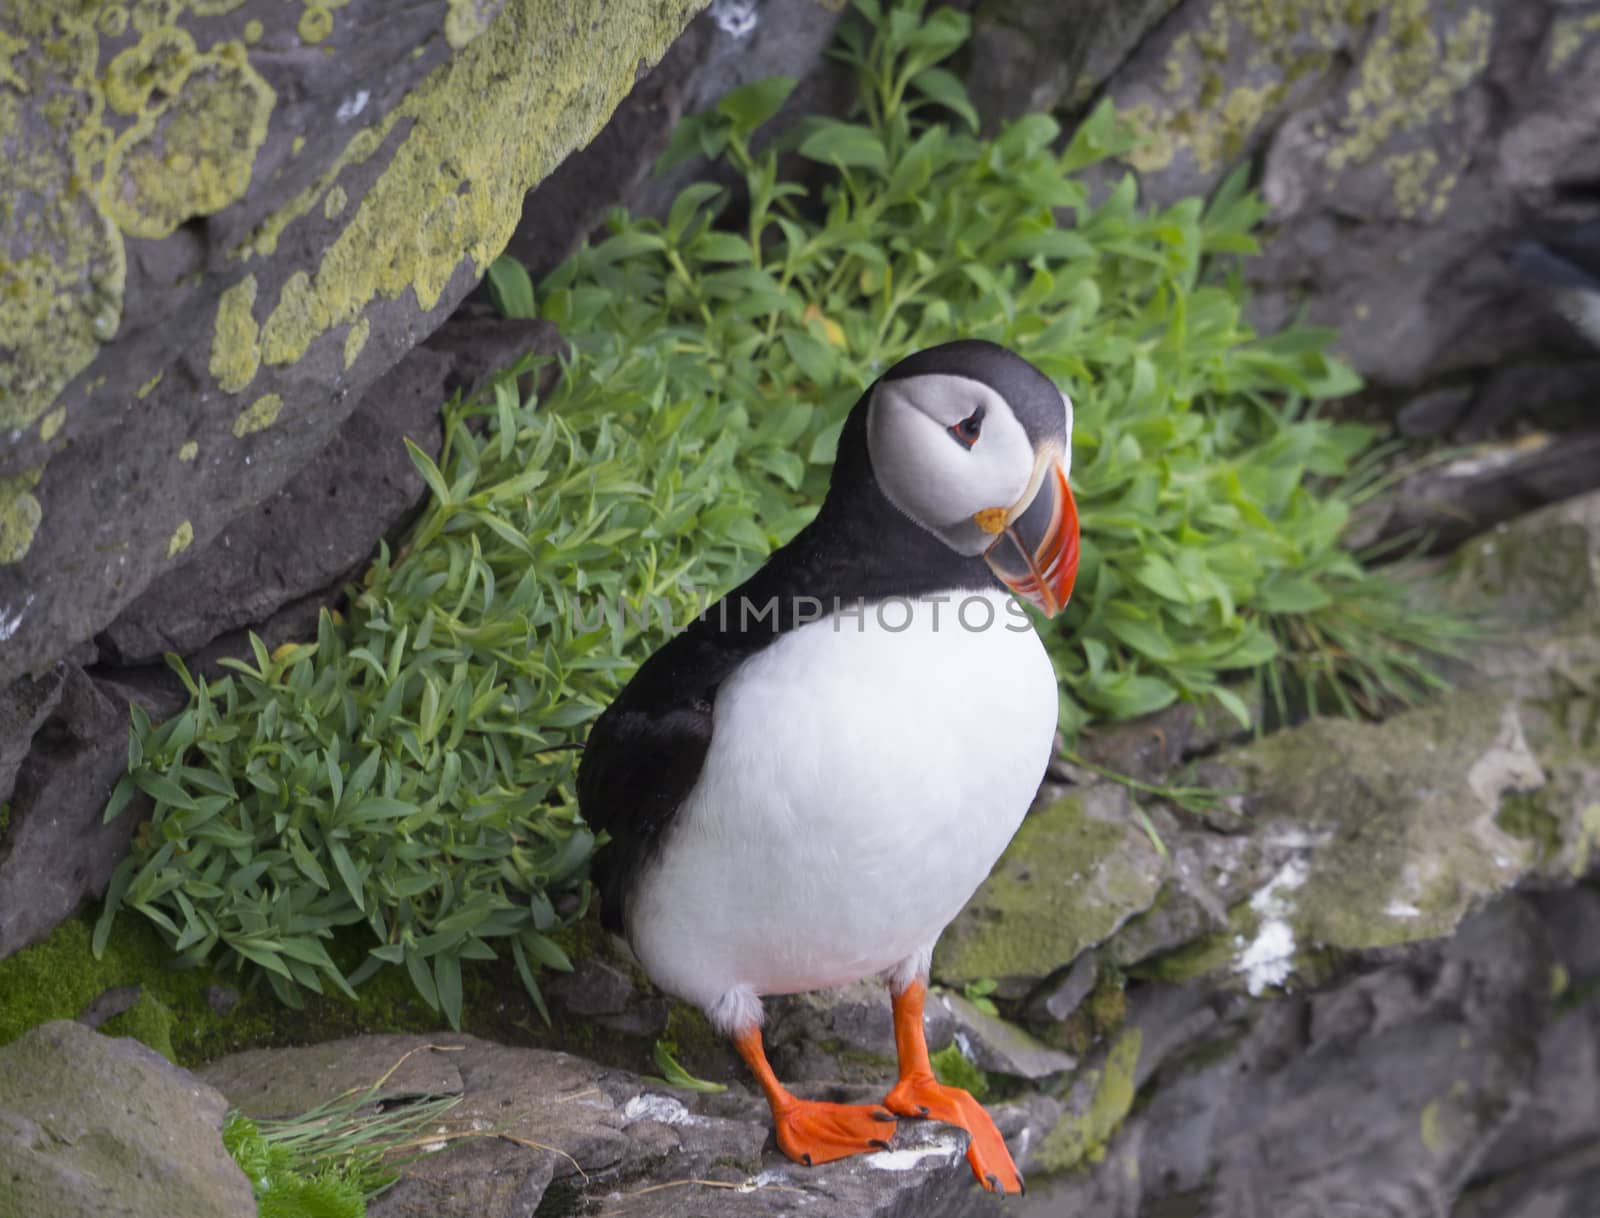 single close up Atlantic puffin (Fratercula arctica) standing on rock of Latrabjarg bird cliffs, green grass and stone background, selective focus, copy space